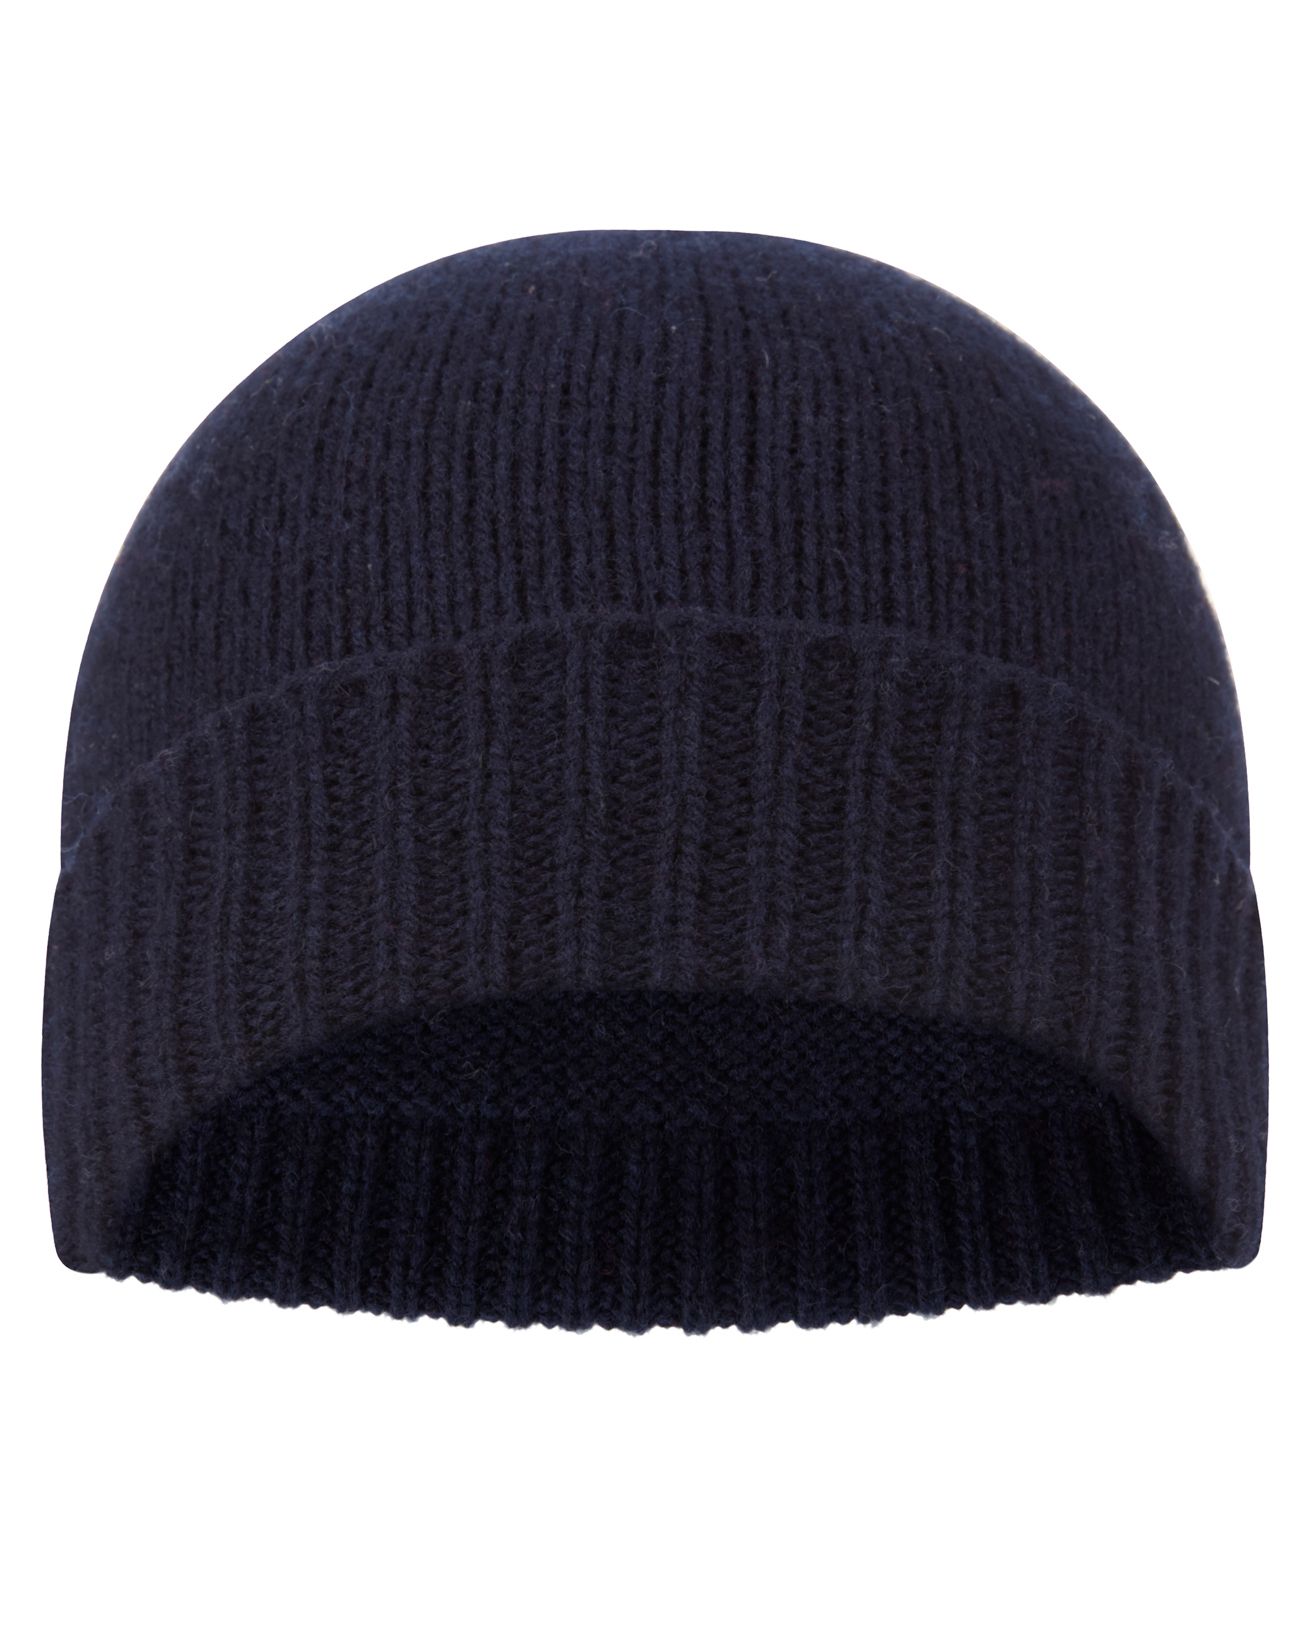 Men's Knitted Lambswool Hat